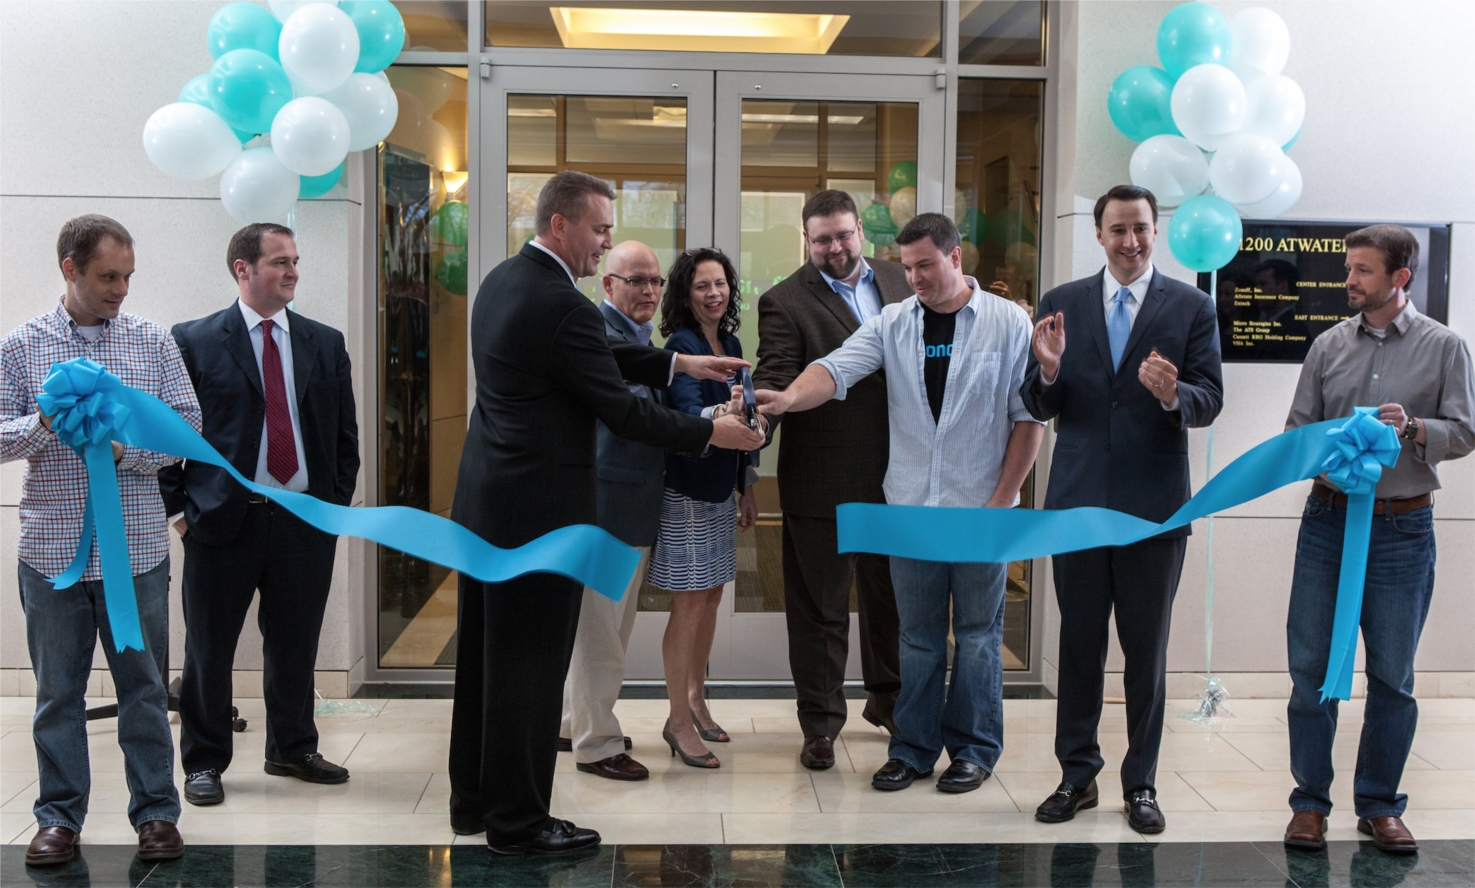 Ribbon cutting ceremony at Zonoff's new offices